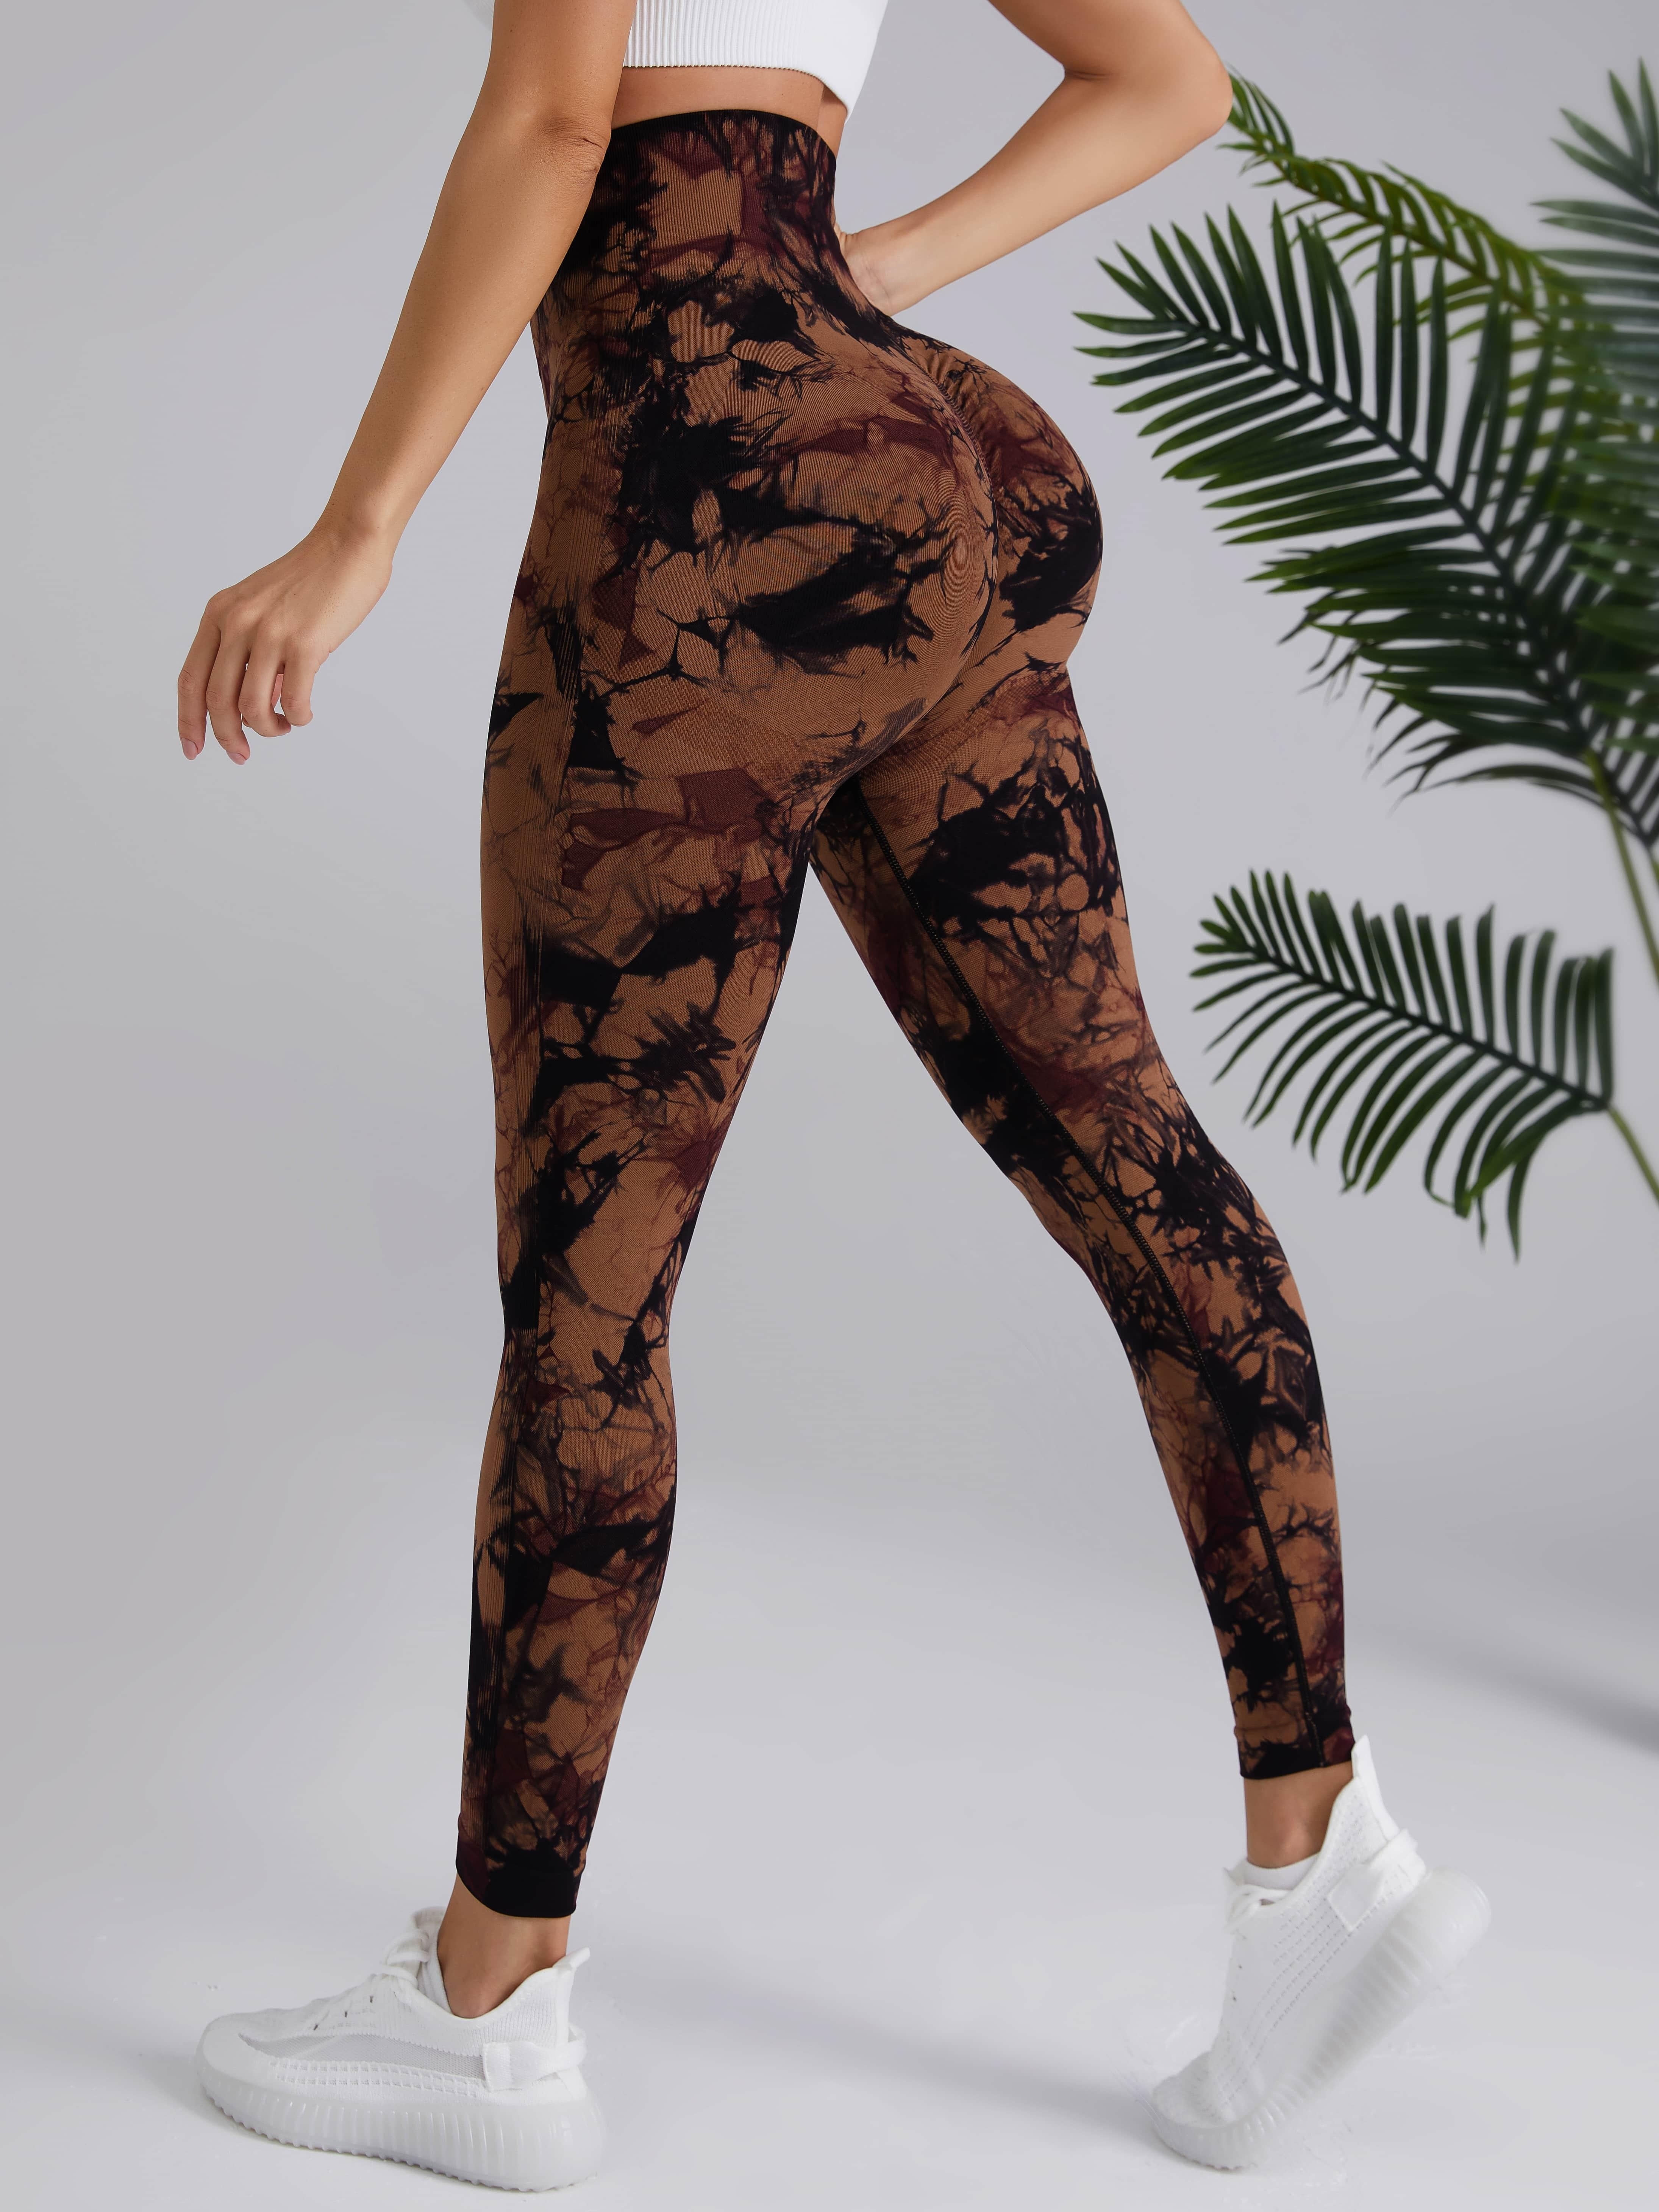 Aayomet New Seamless Tie Dyed Yoga Pants High Waist Tight Fitness Pants  Women Running Yoga Pants for Women Tall with (Brown, M)